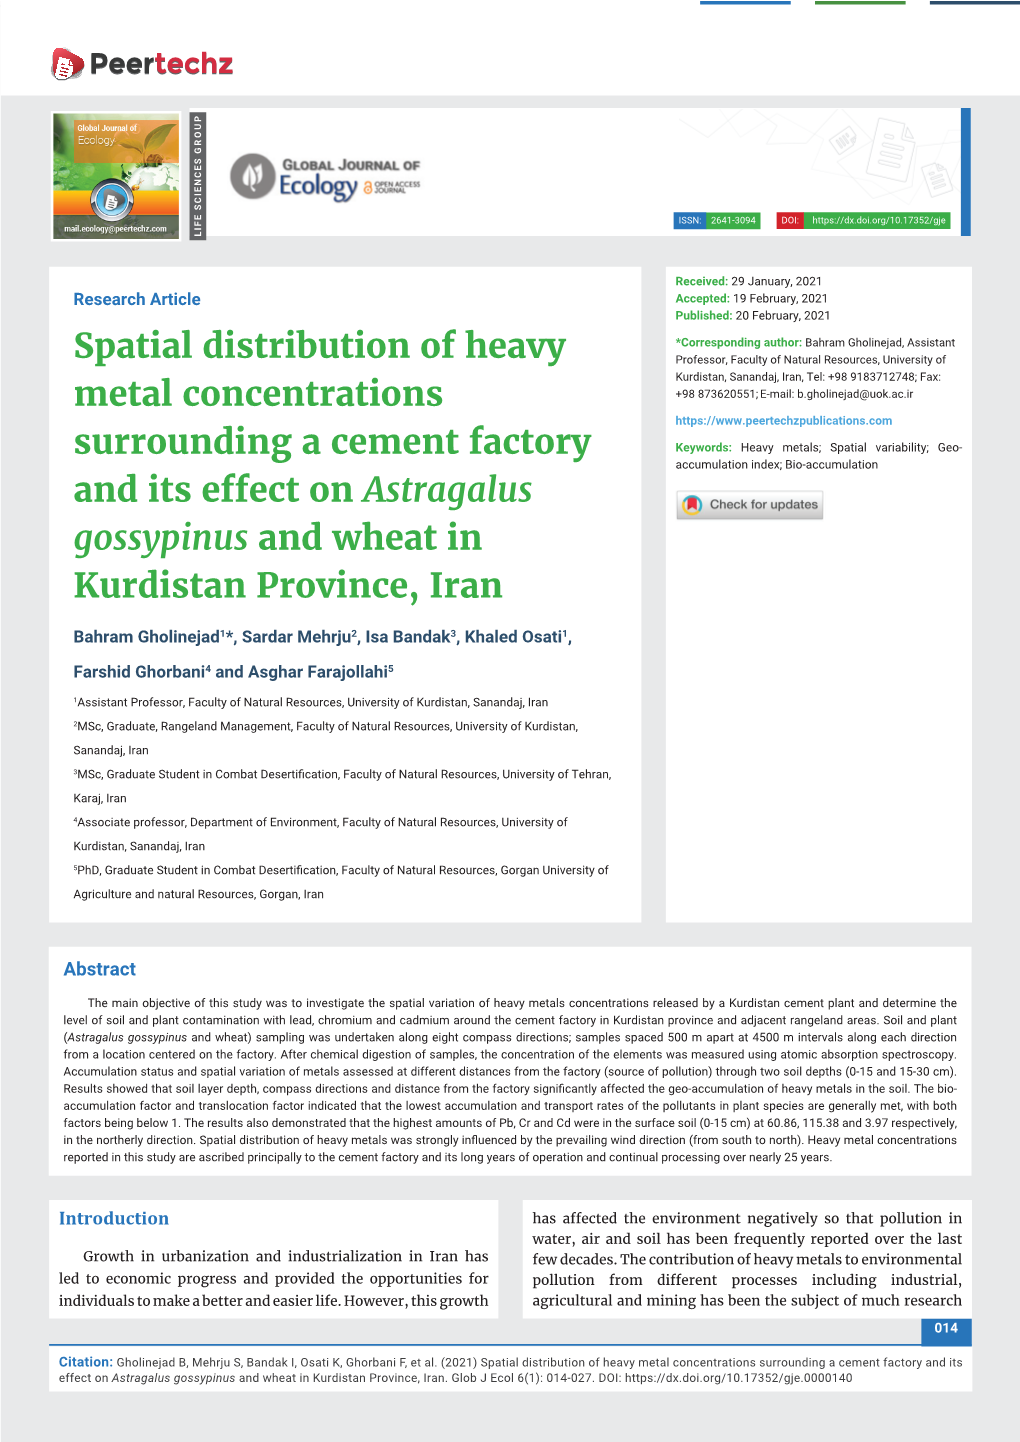 Spatial Distribution of Heavy Metal Concentrations Surrounding a Cement Factory and Its Effect on Astragalus Gossypinus and Wheat in Kurdistan Province, Iran